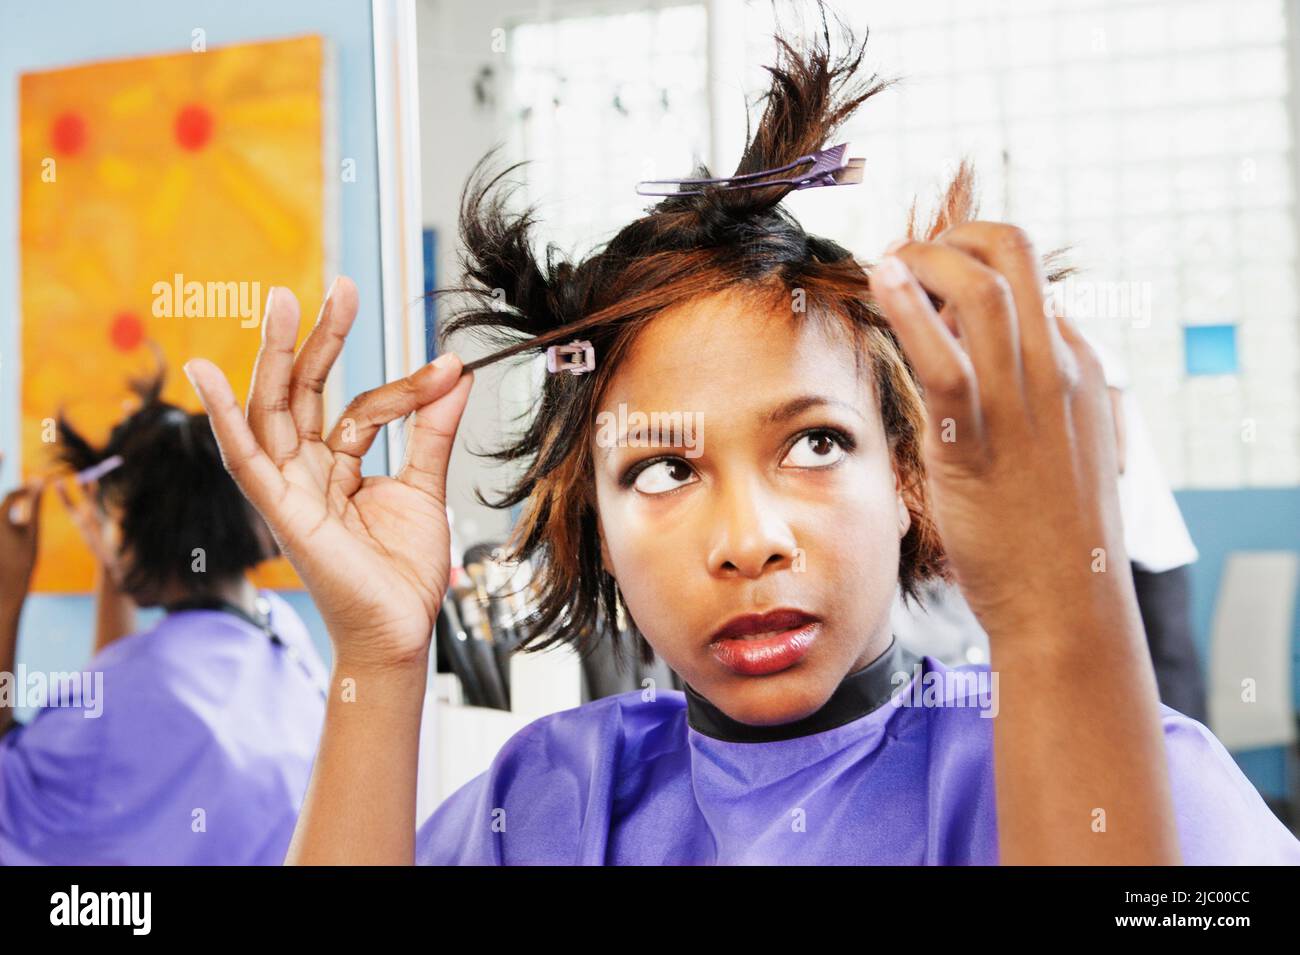 Young woman examining herself in the mirror Stock Photo